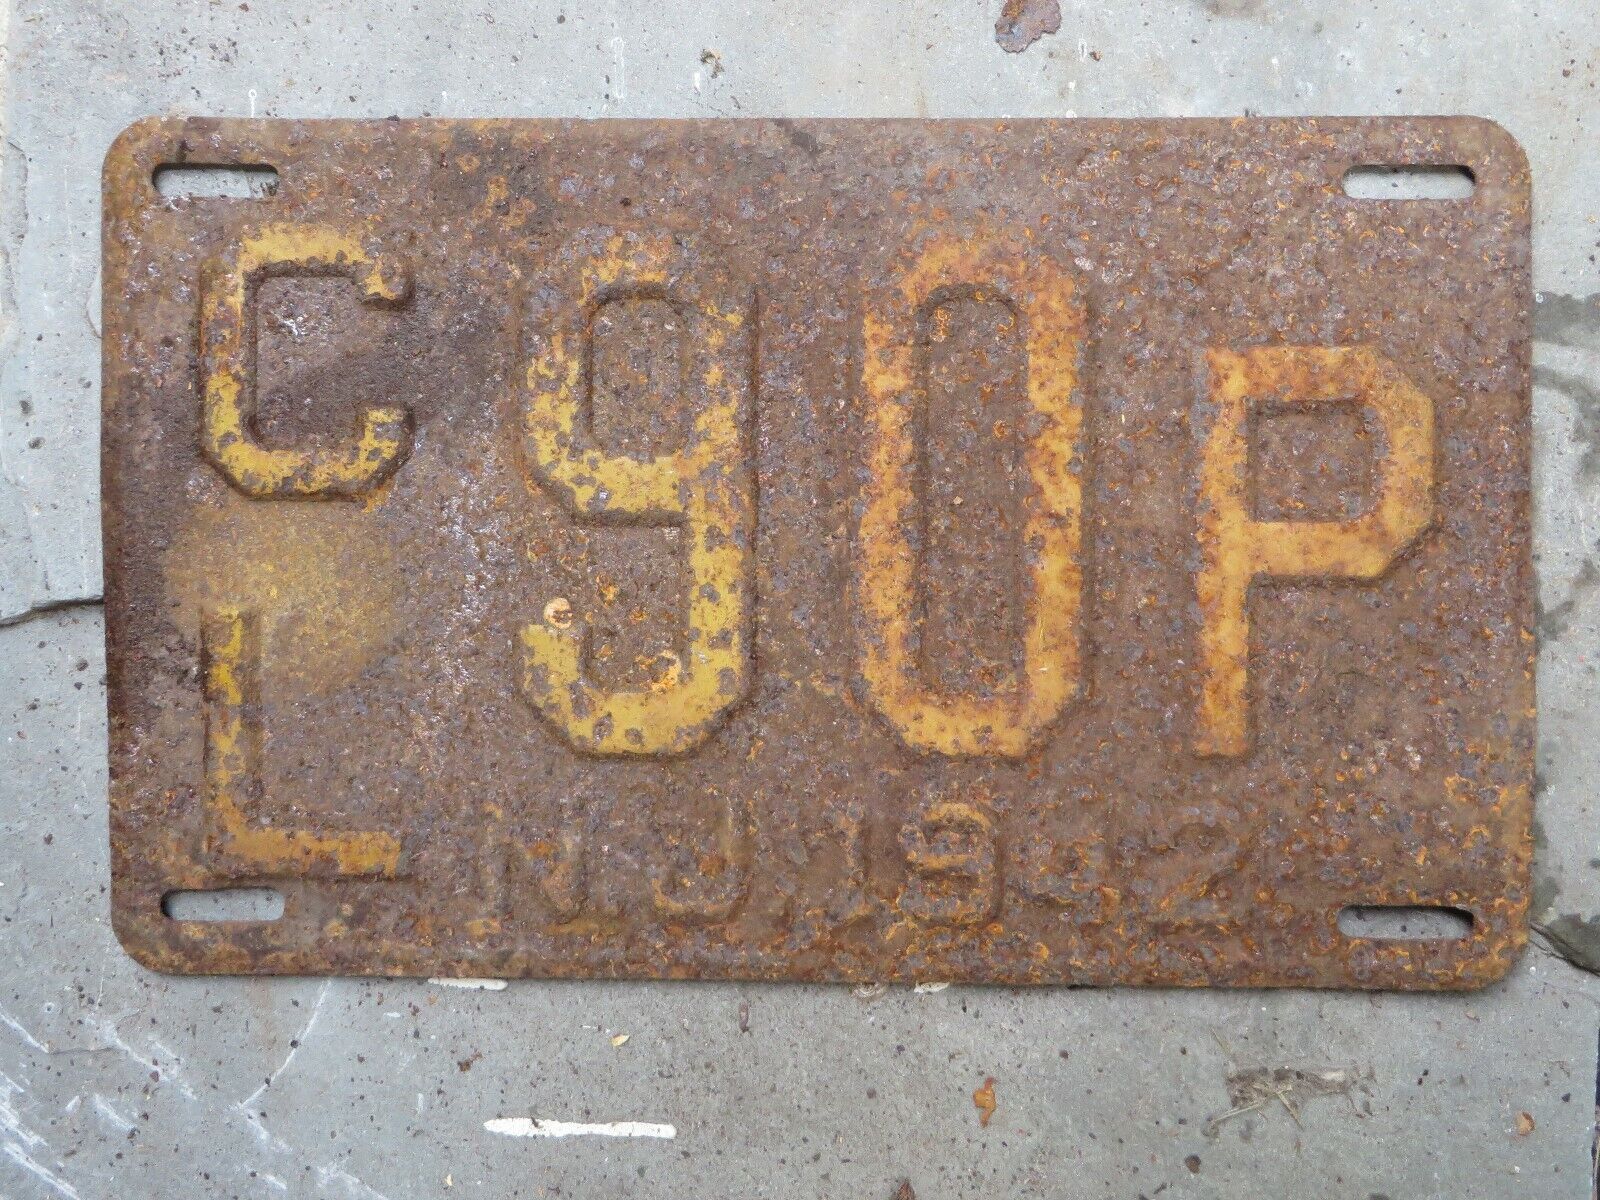 Antique New Jersey License Plate CL 90P 1942